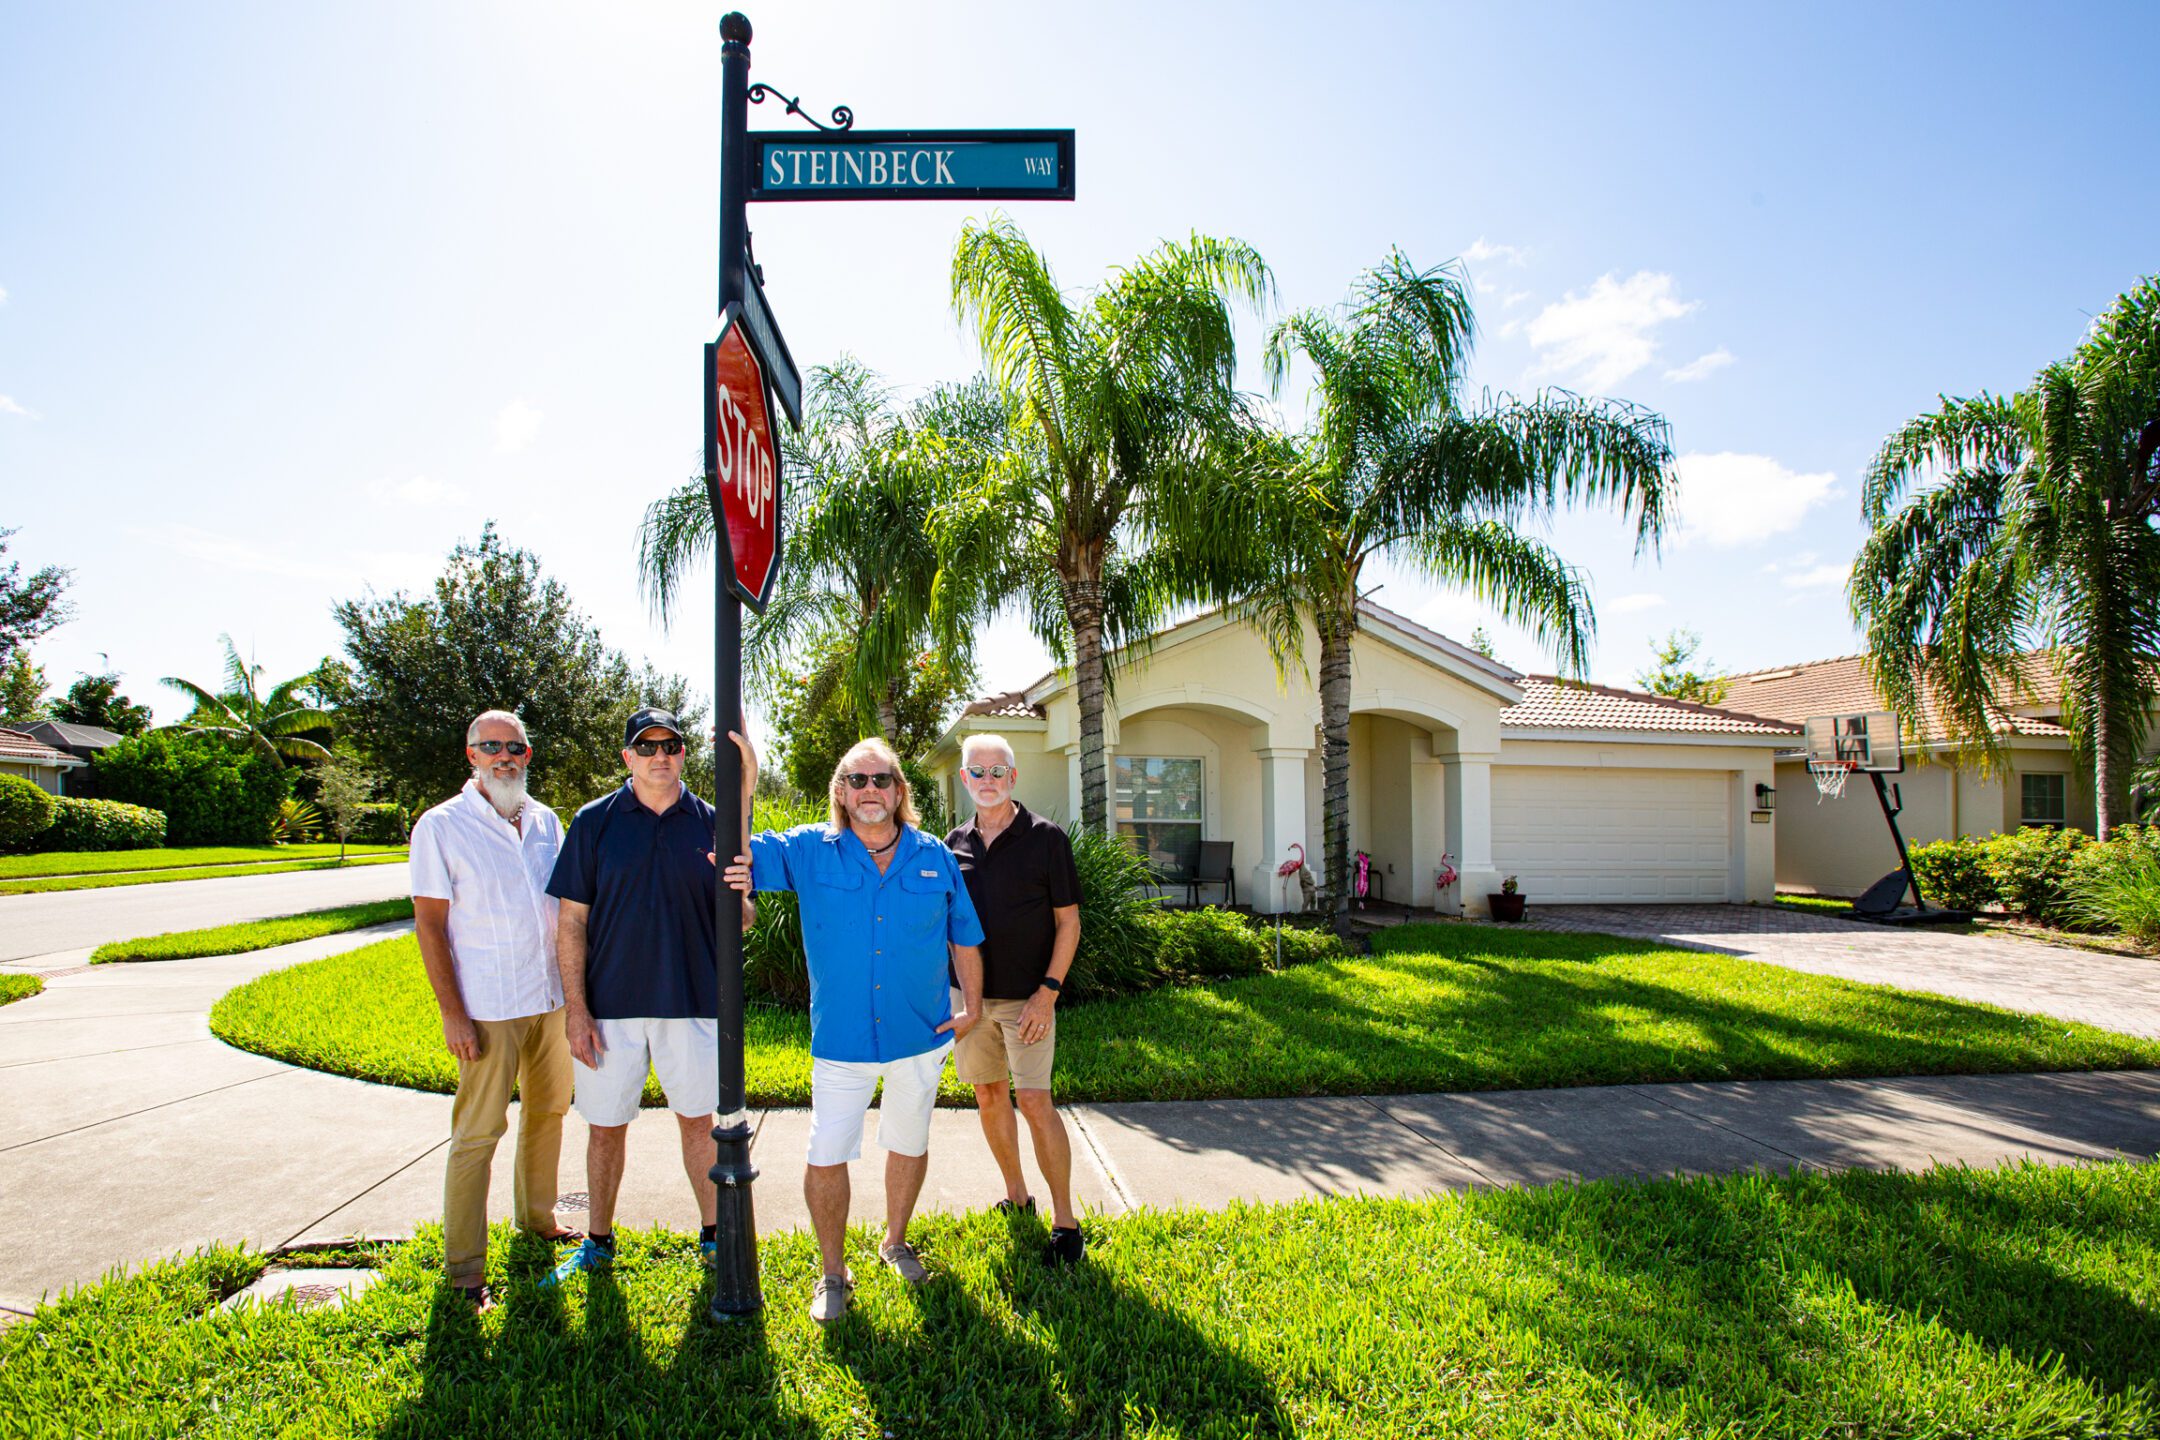 Steinbeck Way - Four men standing by street sign